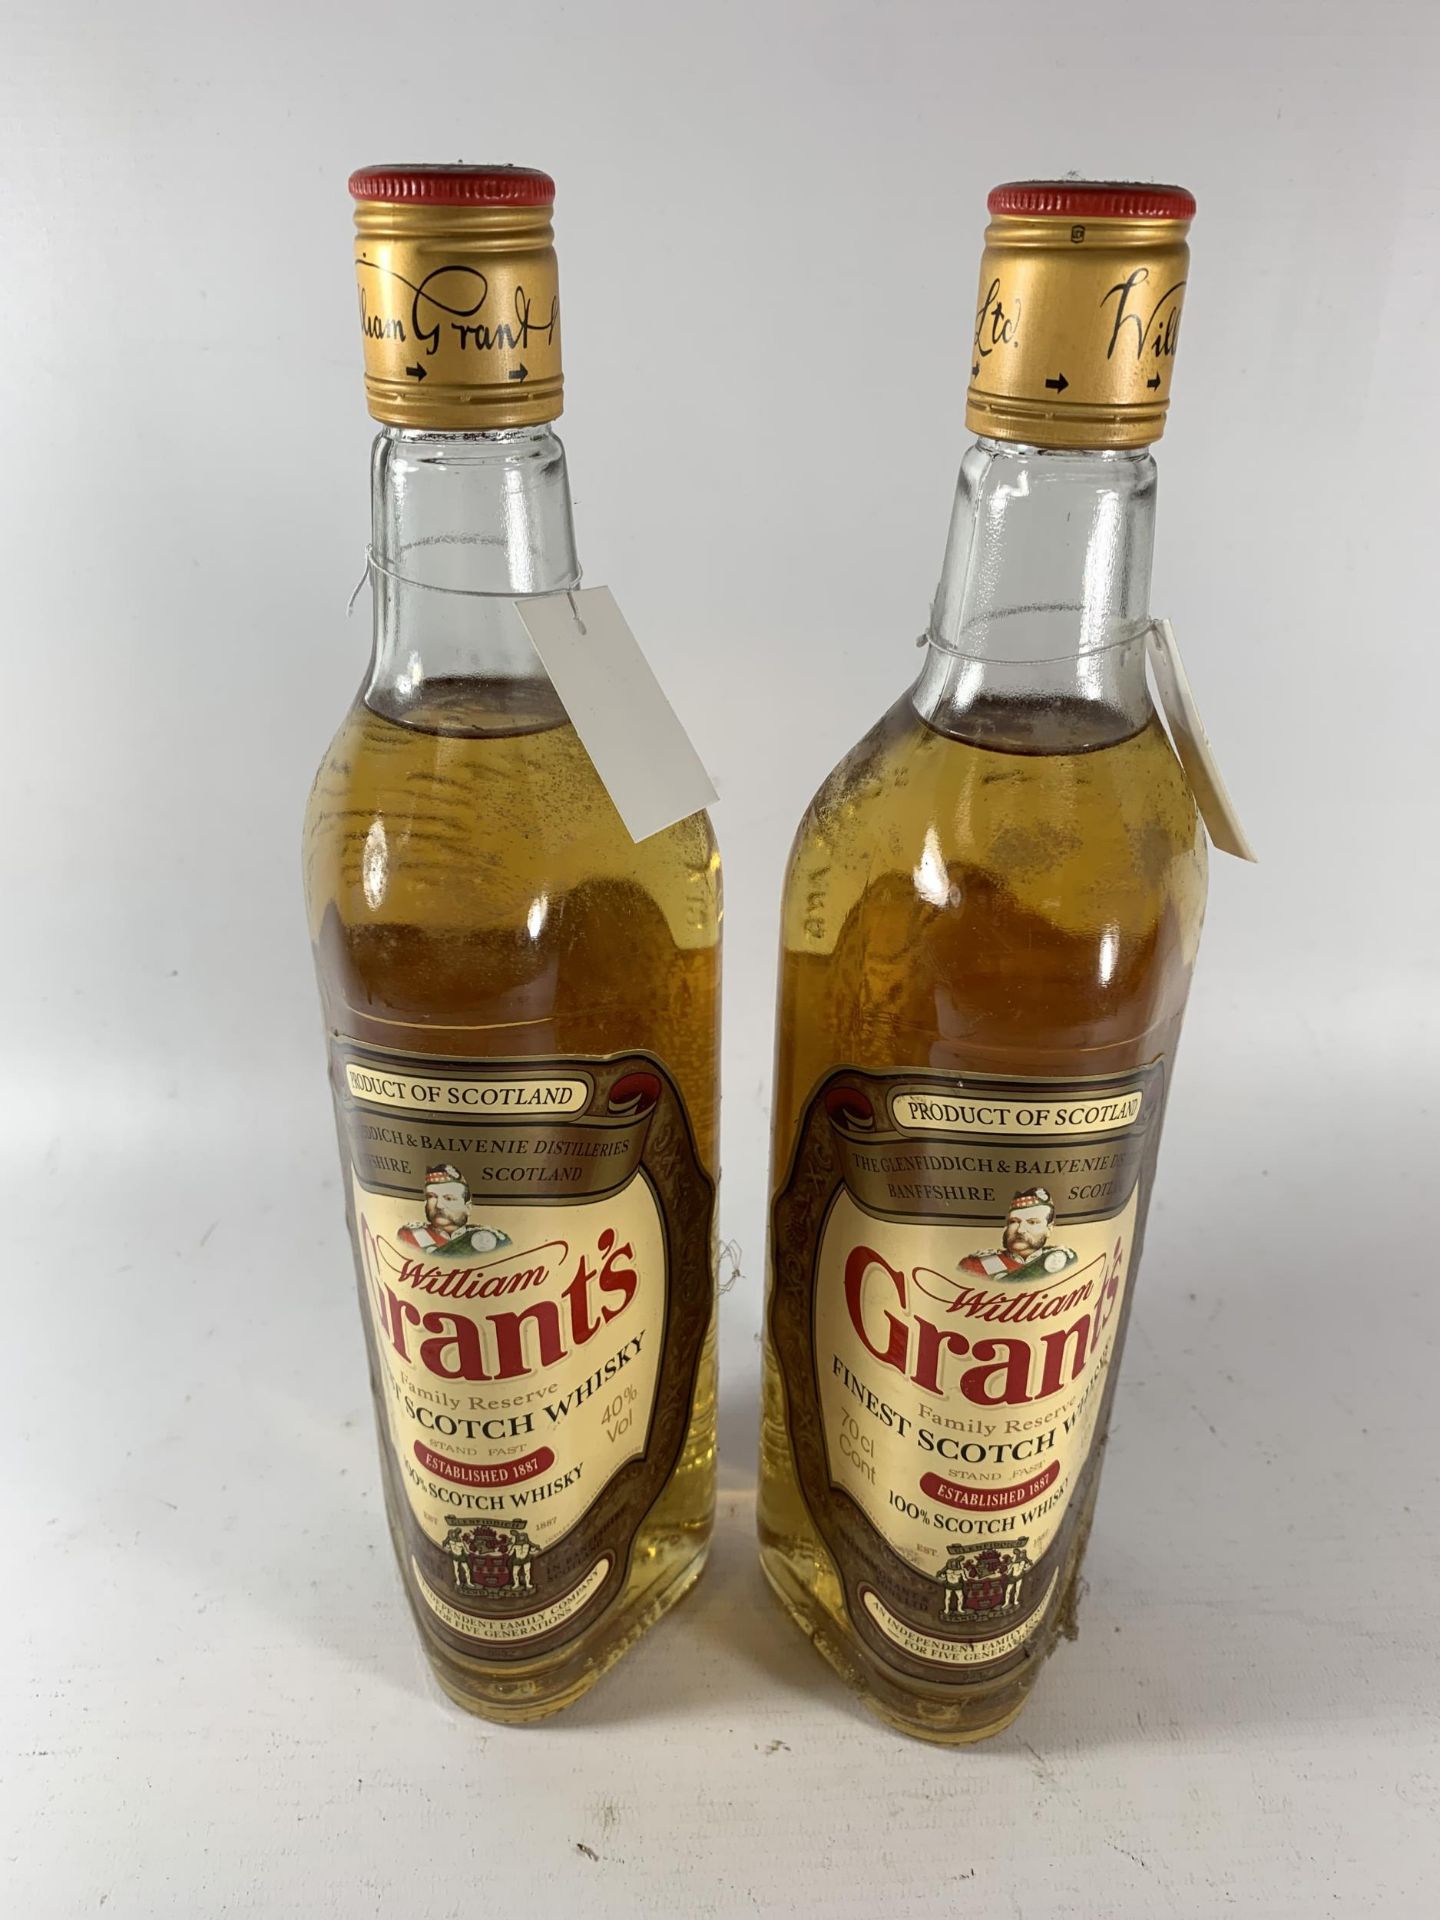 2 X 70CL BOTTLES - WILLIAM GRANT'S FAMILY RESERVE FINEST SCOTCH WHISKY